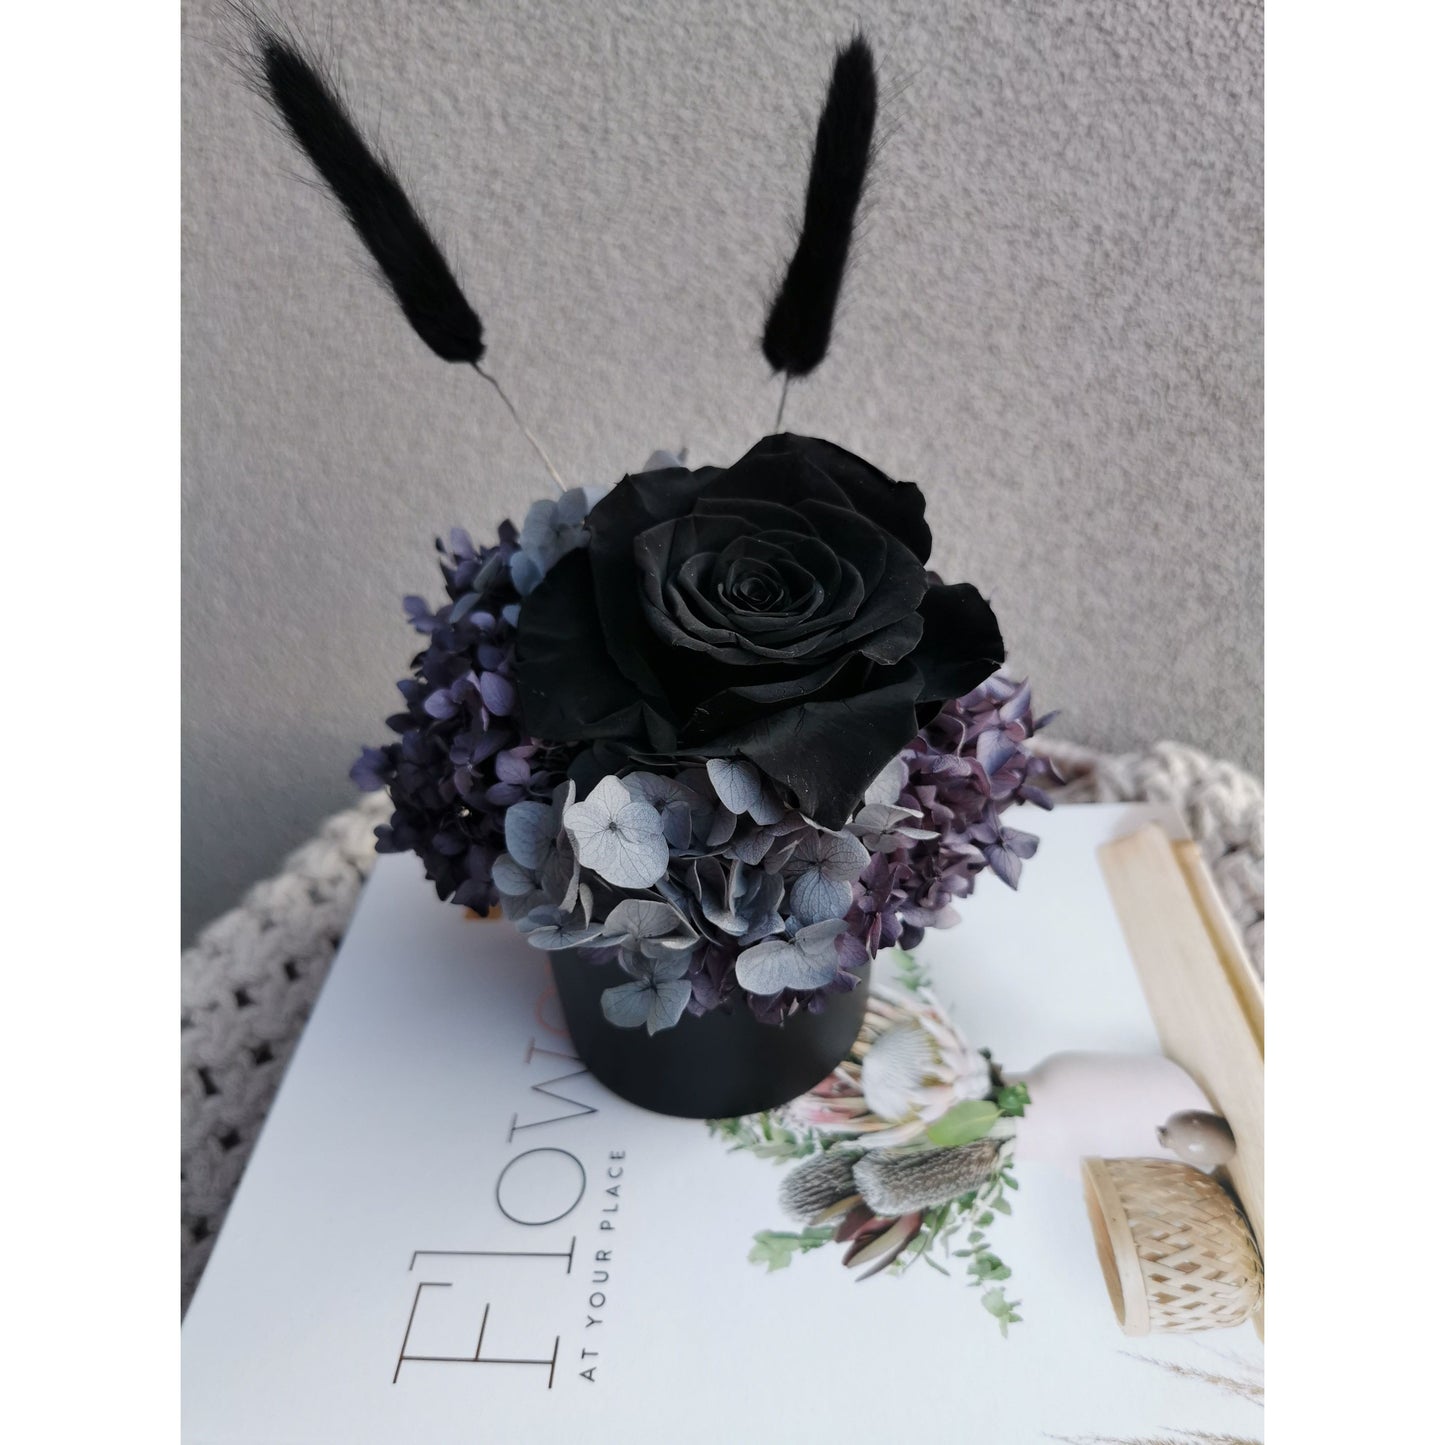 Black, grey & purple dried & preserved flower arrangement in mini black pot featuring a black rose and black bunny tails. Photo shows arrangement sitting on top of books against a blank wall